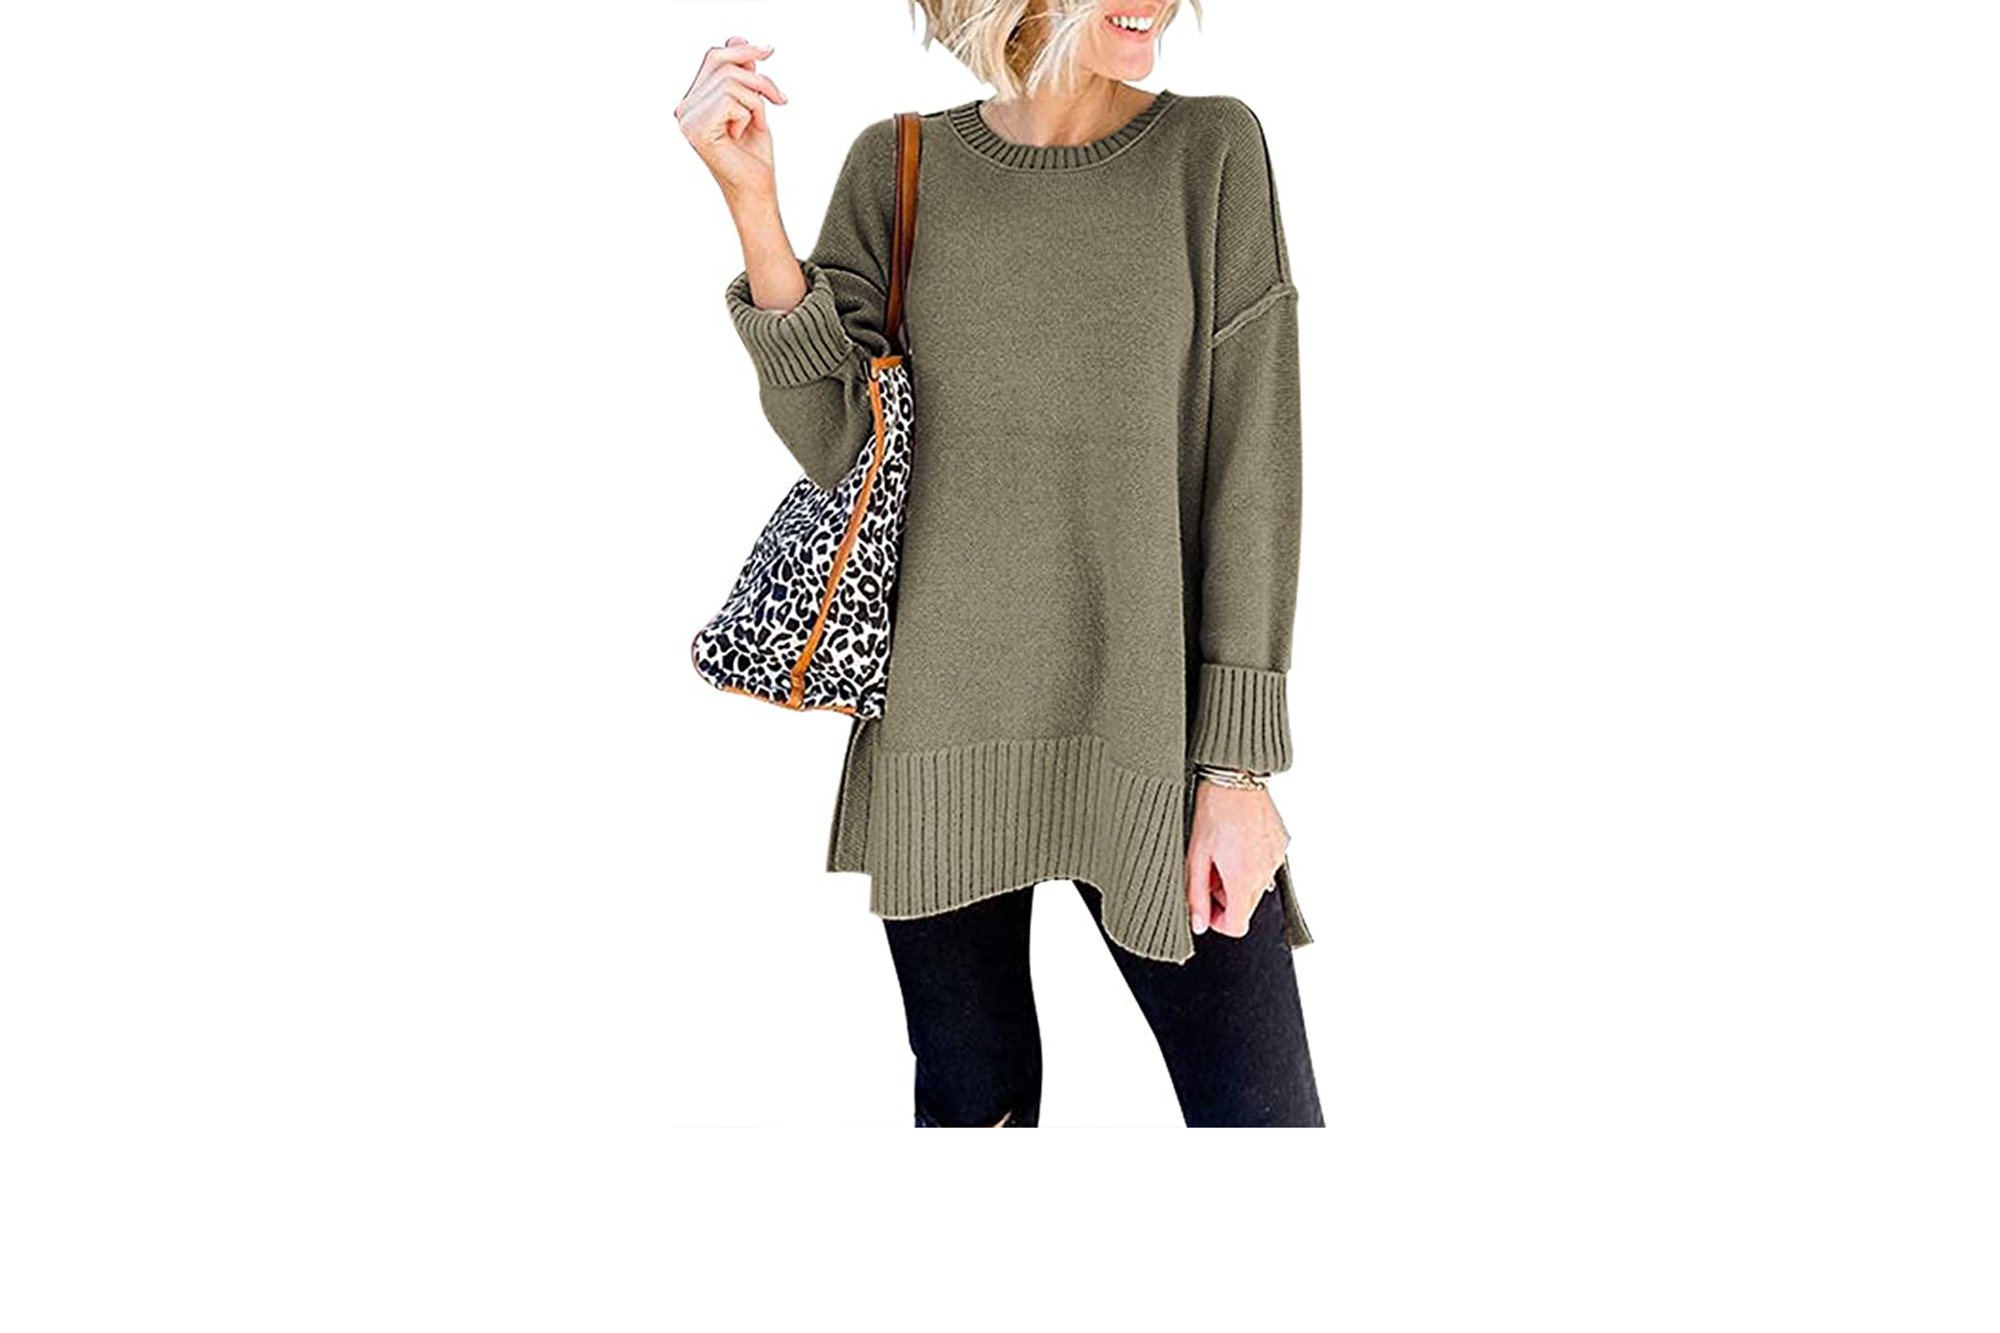 Tunic Sweaters To Wear With Leggings